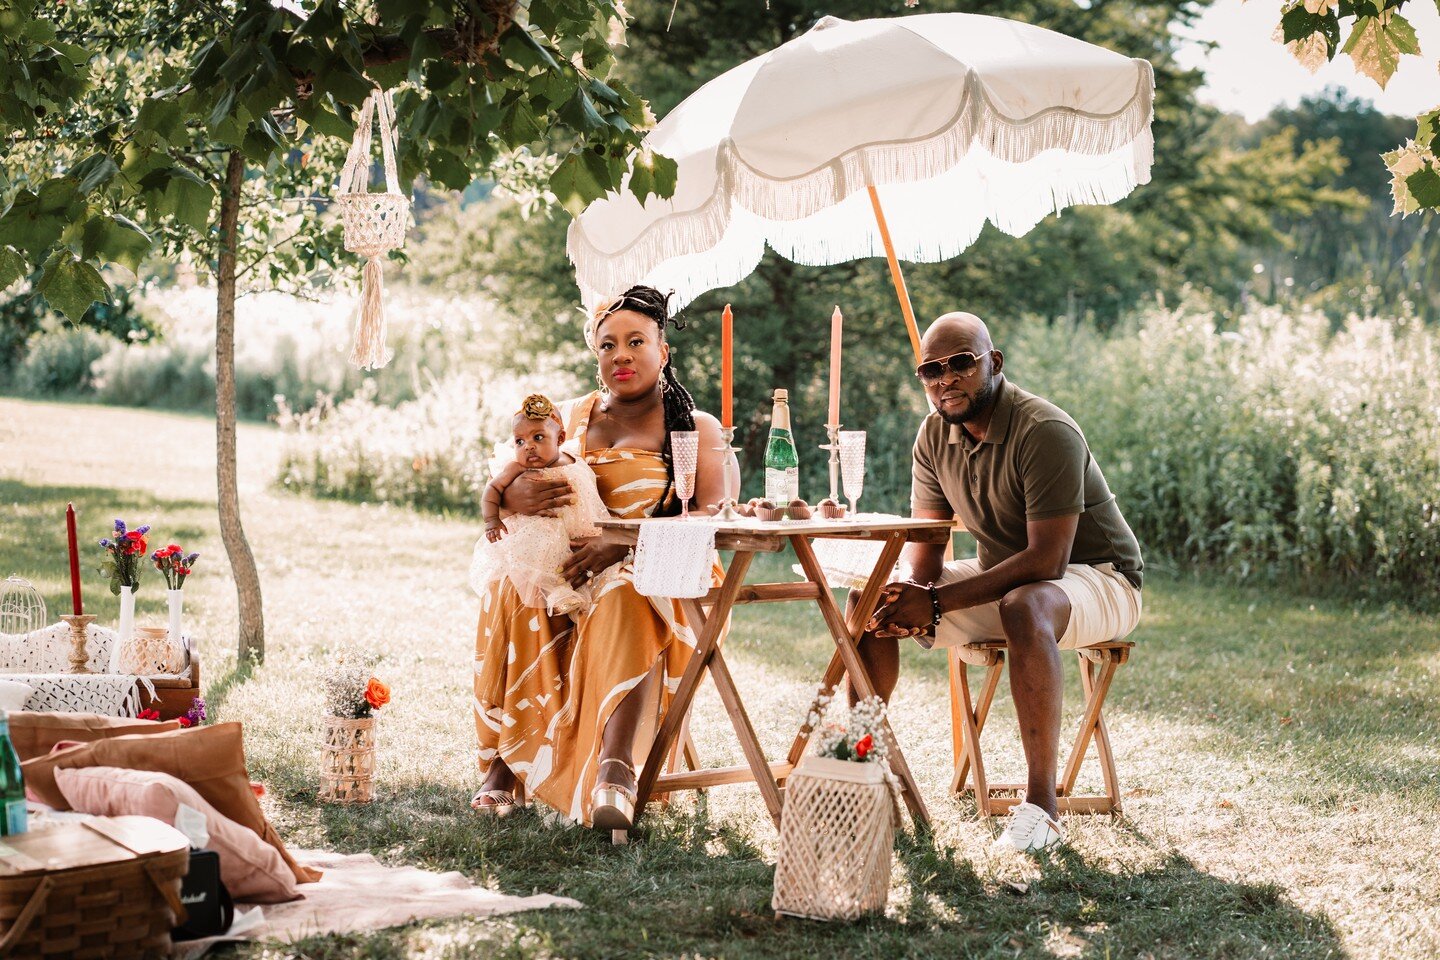 When her vision is an editorial style picnic.

She is a queen and has pushed me artistically to shoot beyond what I would normally shoot. I am so grateful she has.

Different styles of art &amp; photography can provoke deep meaning, connection and fe